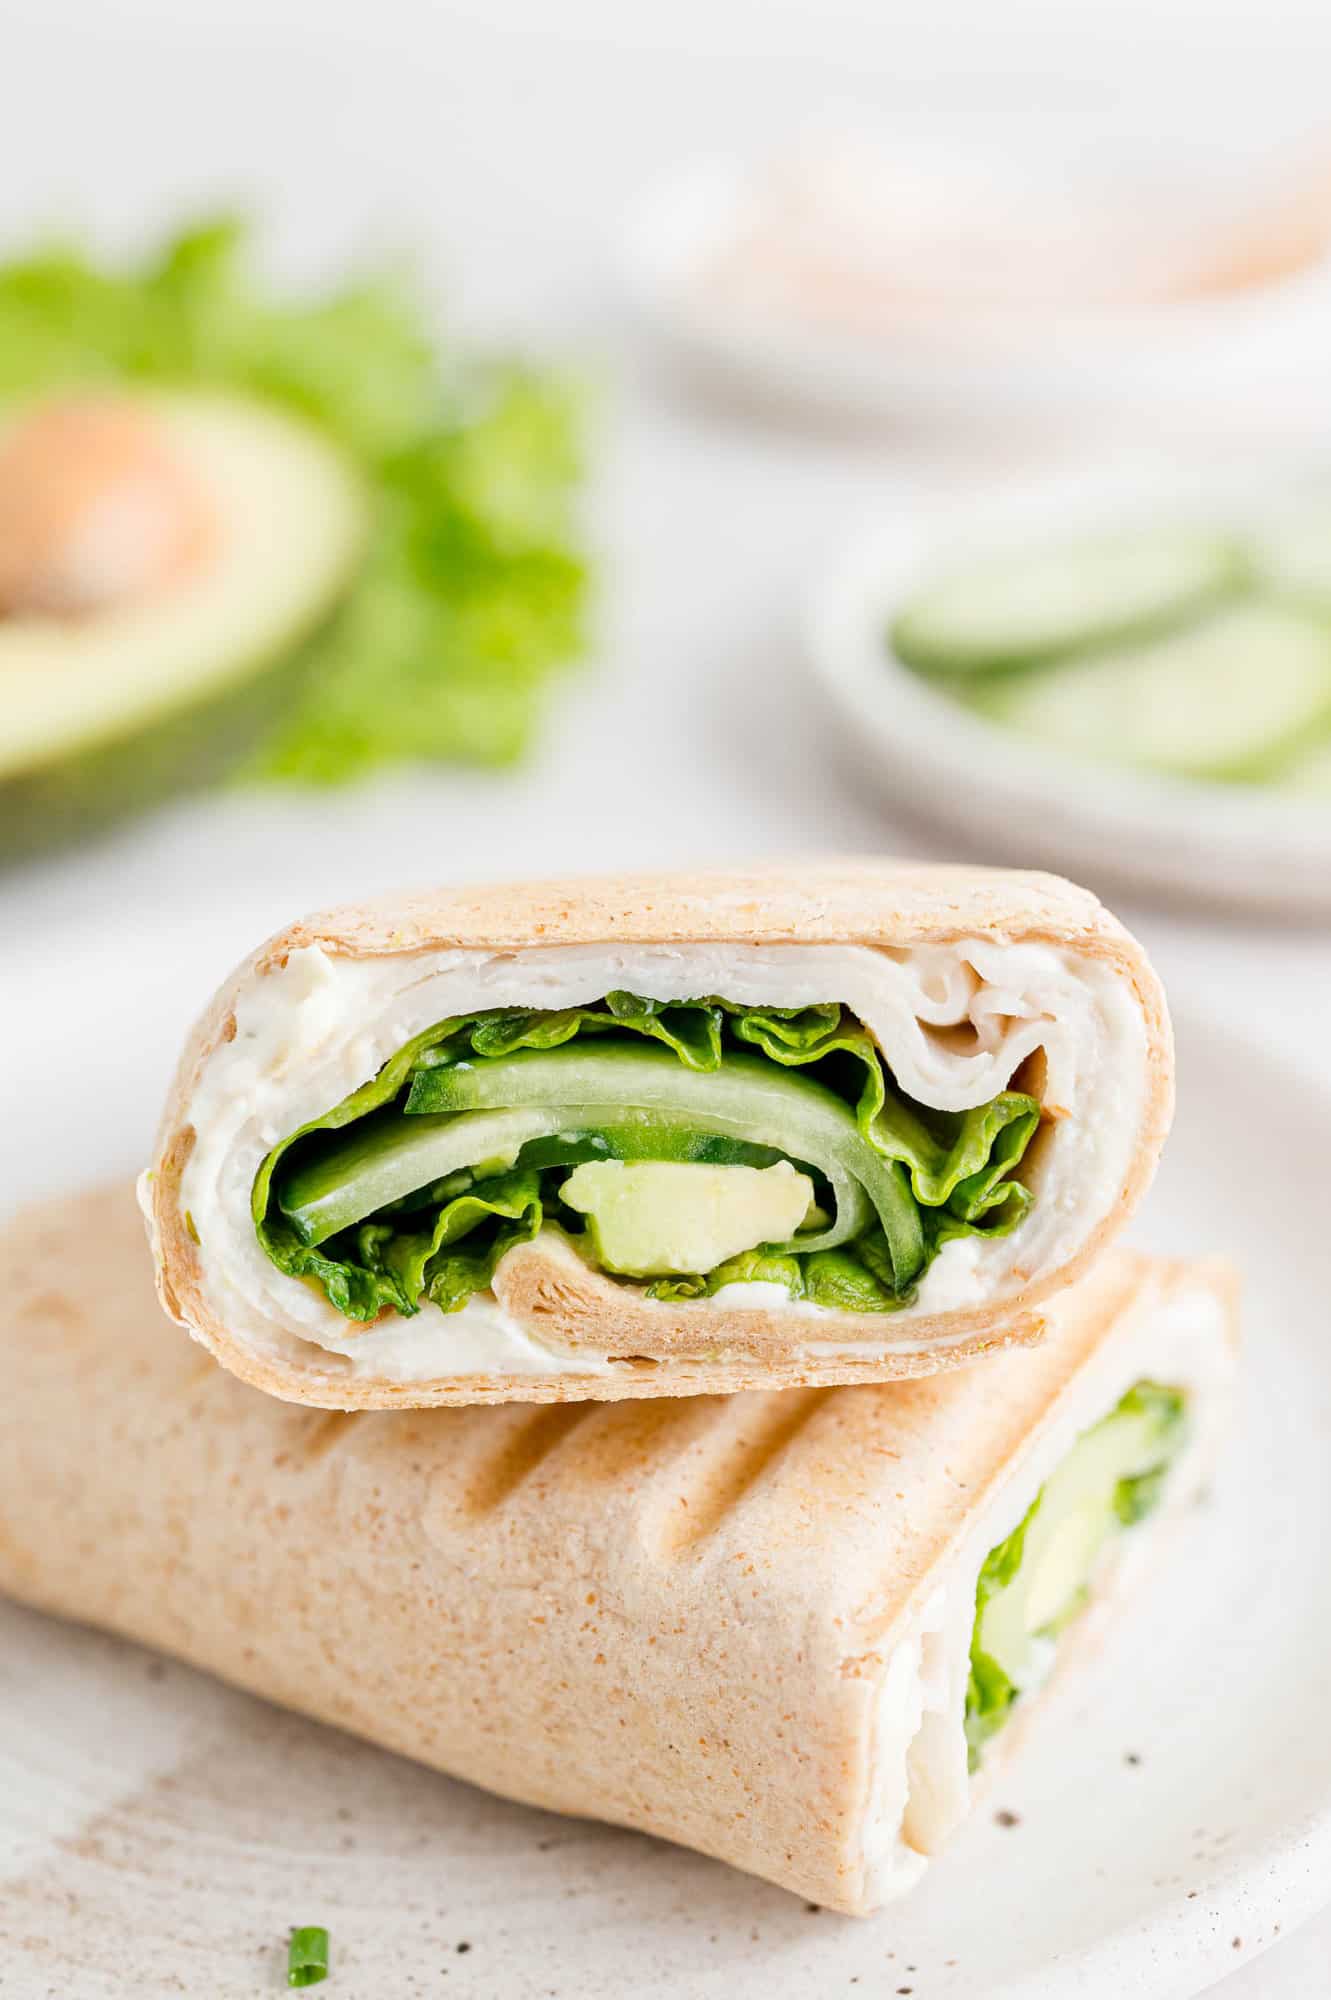 Two halves of a turkey wrap on a white plate, with an avocado and bowl of cucumber slices in the background.